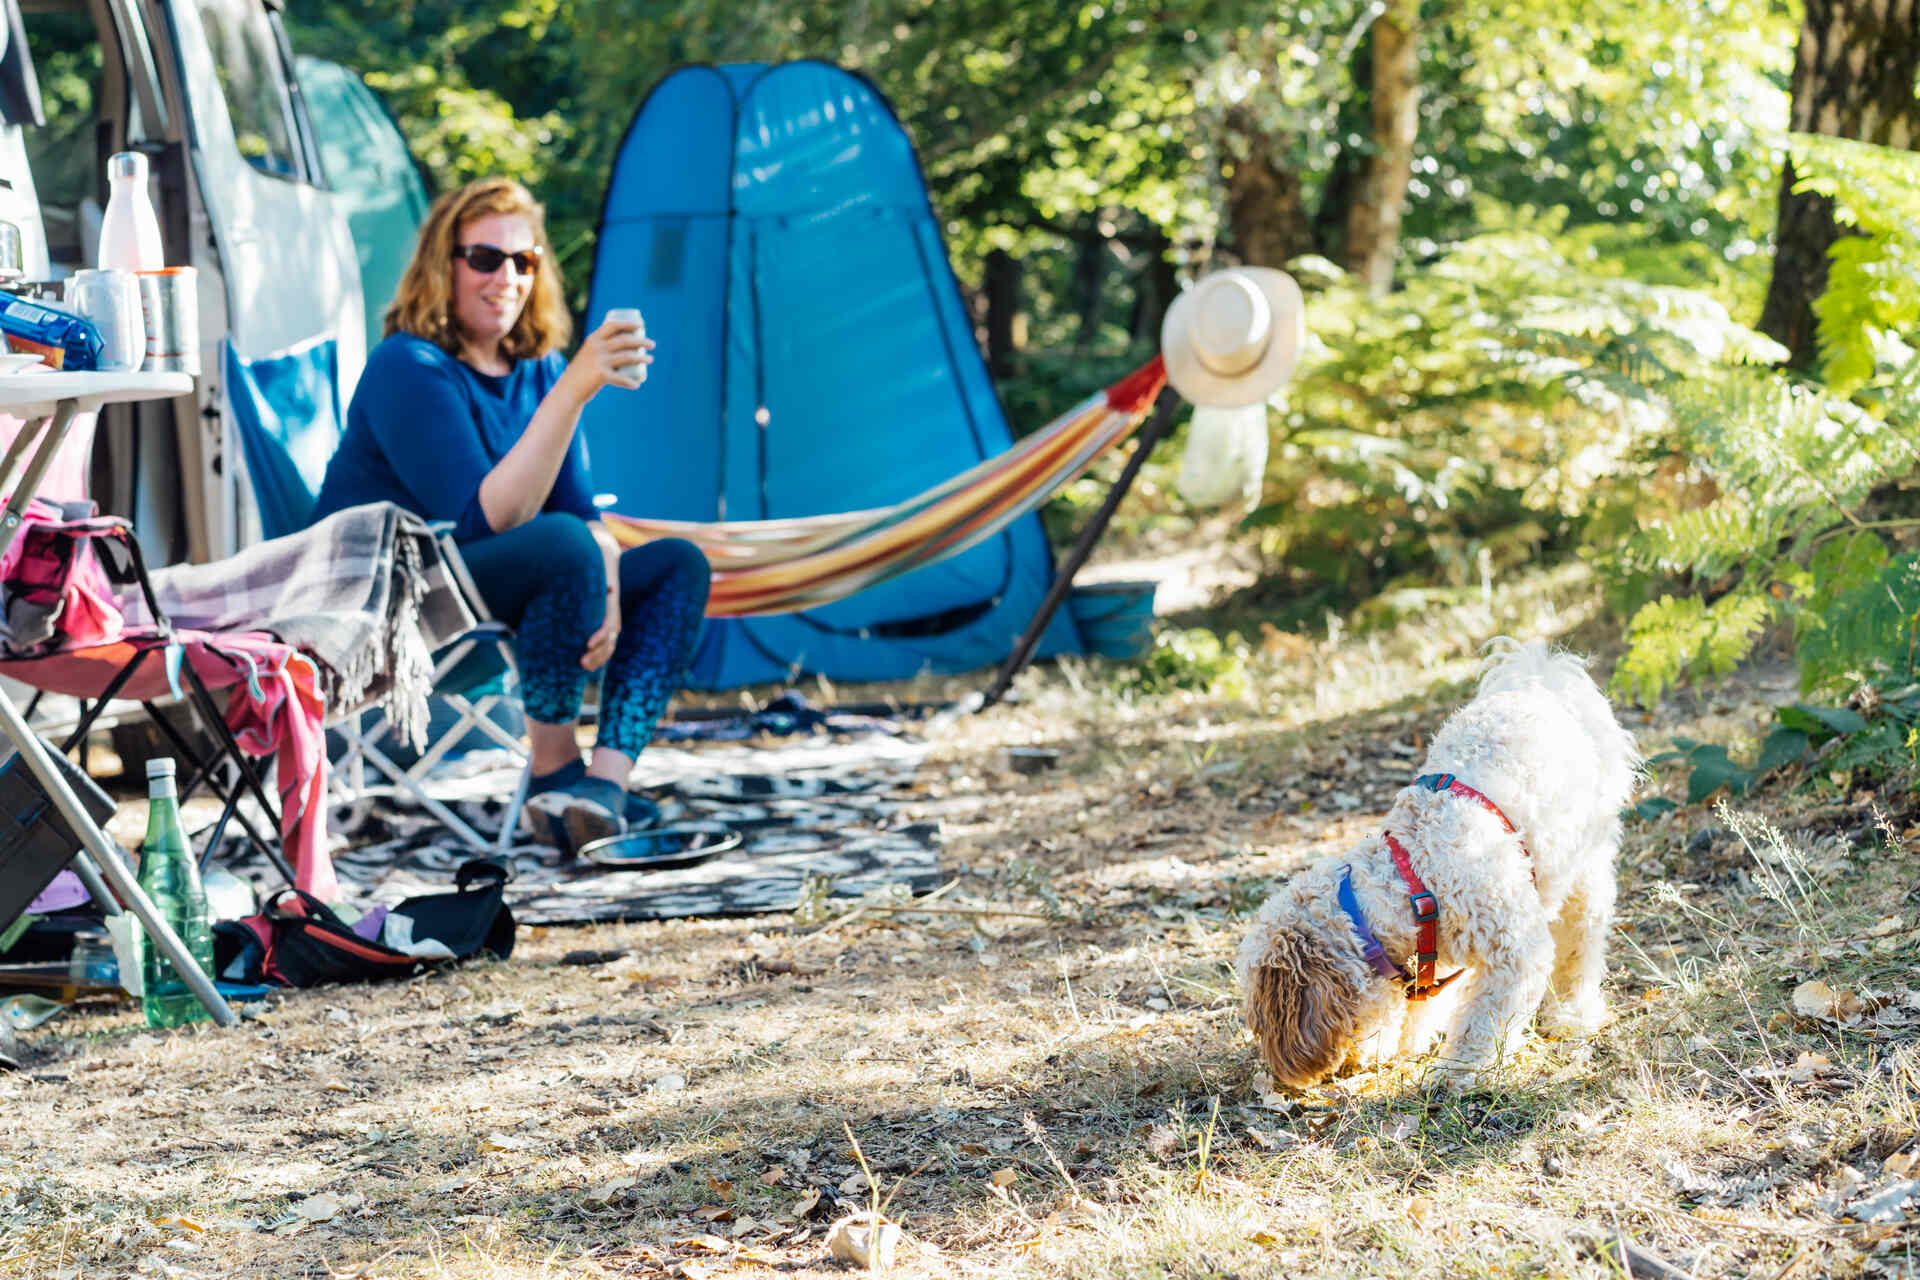 A dog sniffing around a campsite near their owner